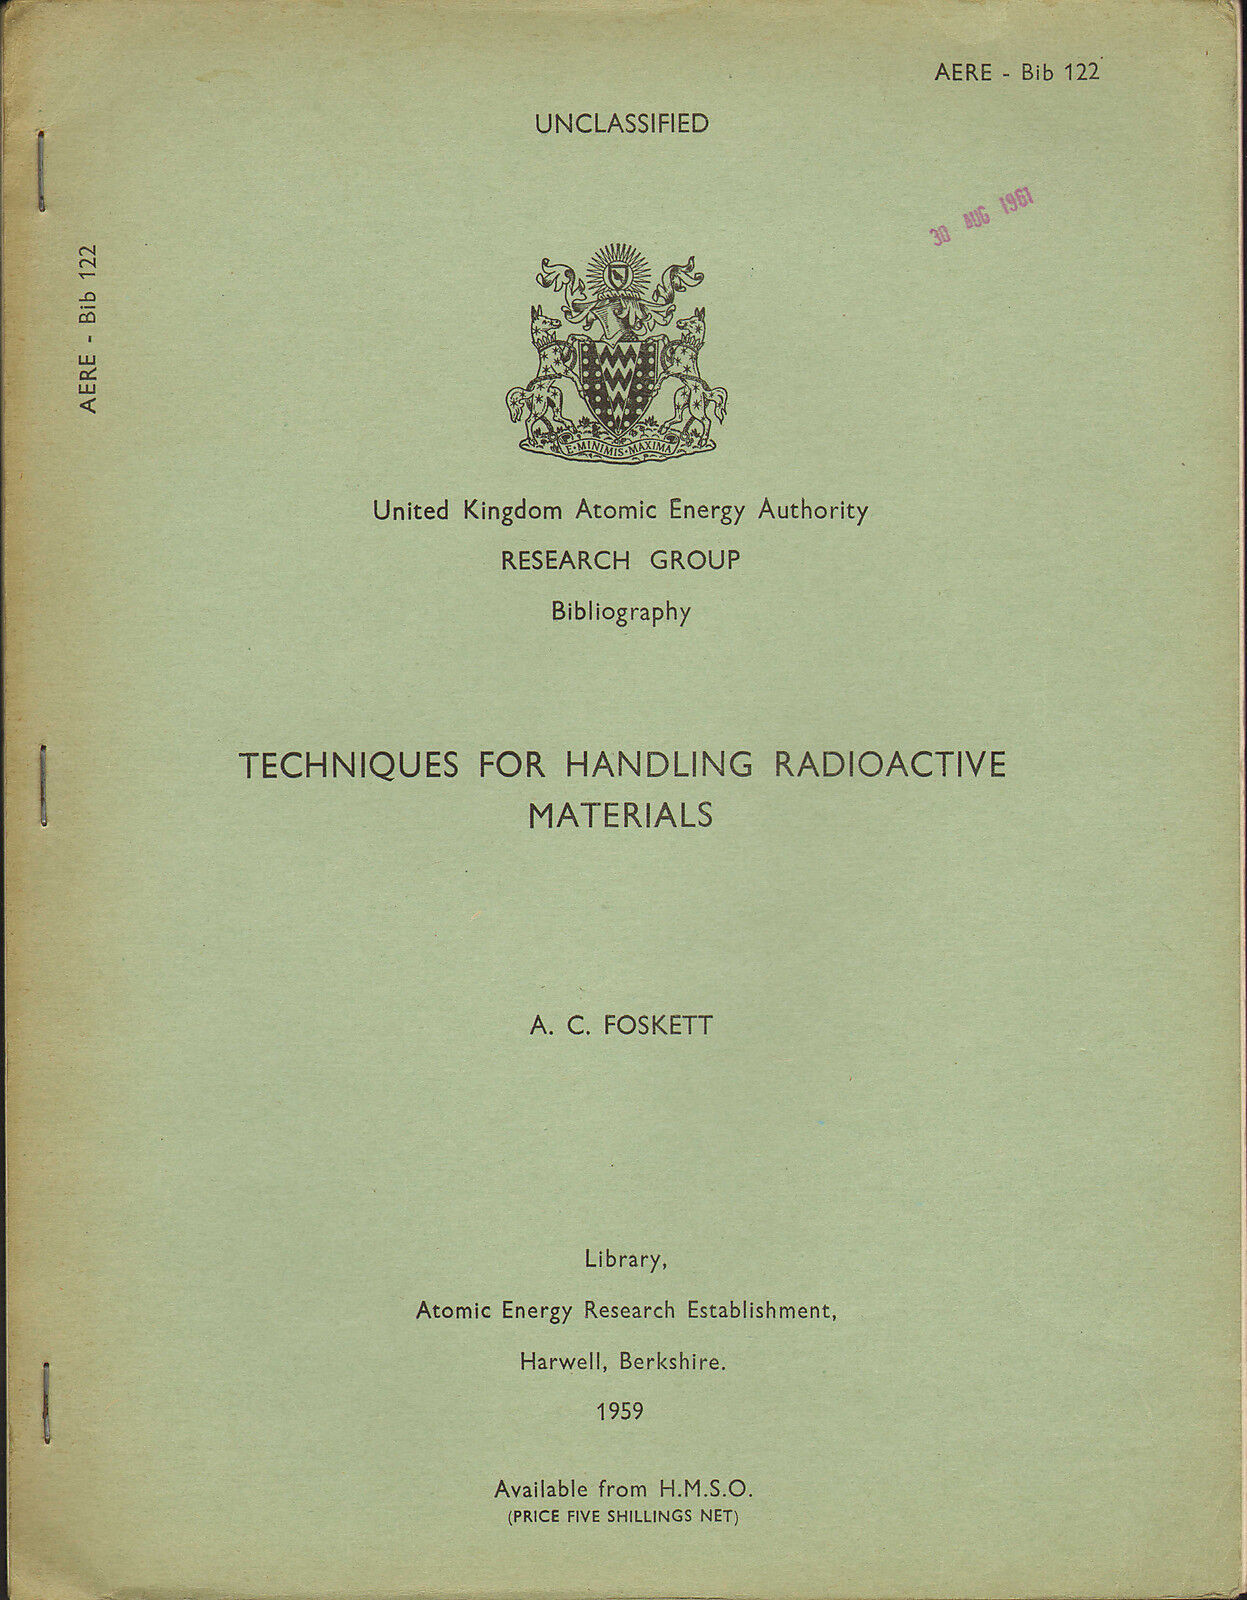 techniques for handling radioactive materials .bibliography . a.c. foskett 1959